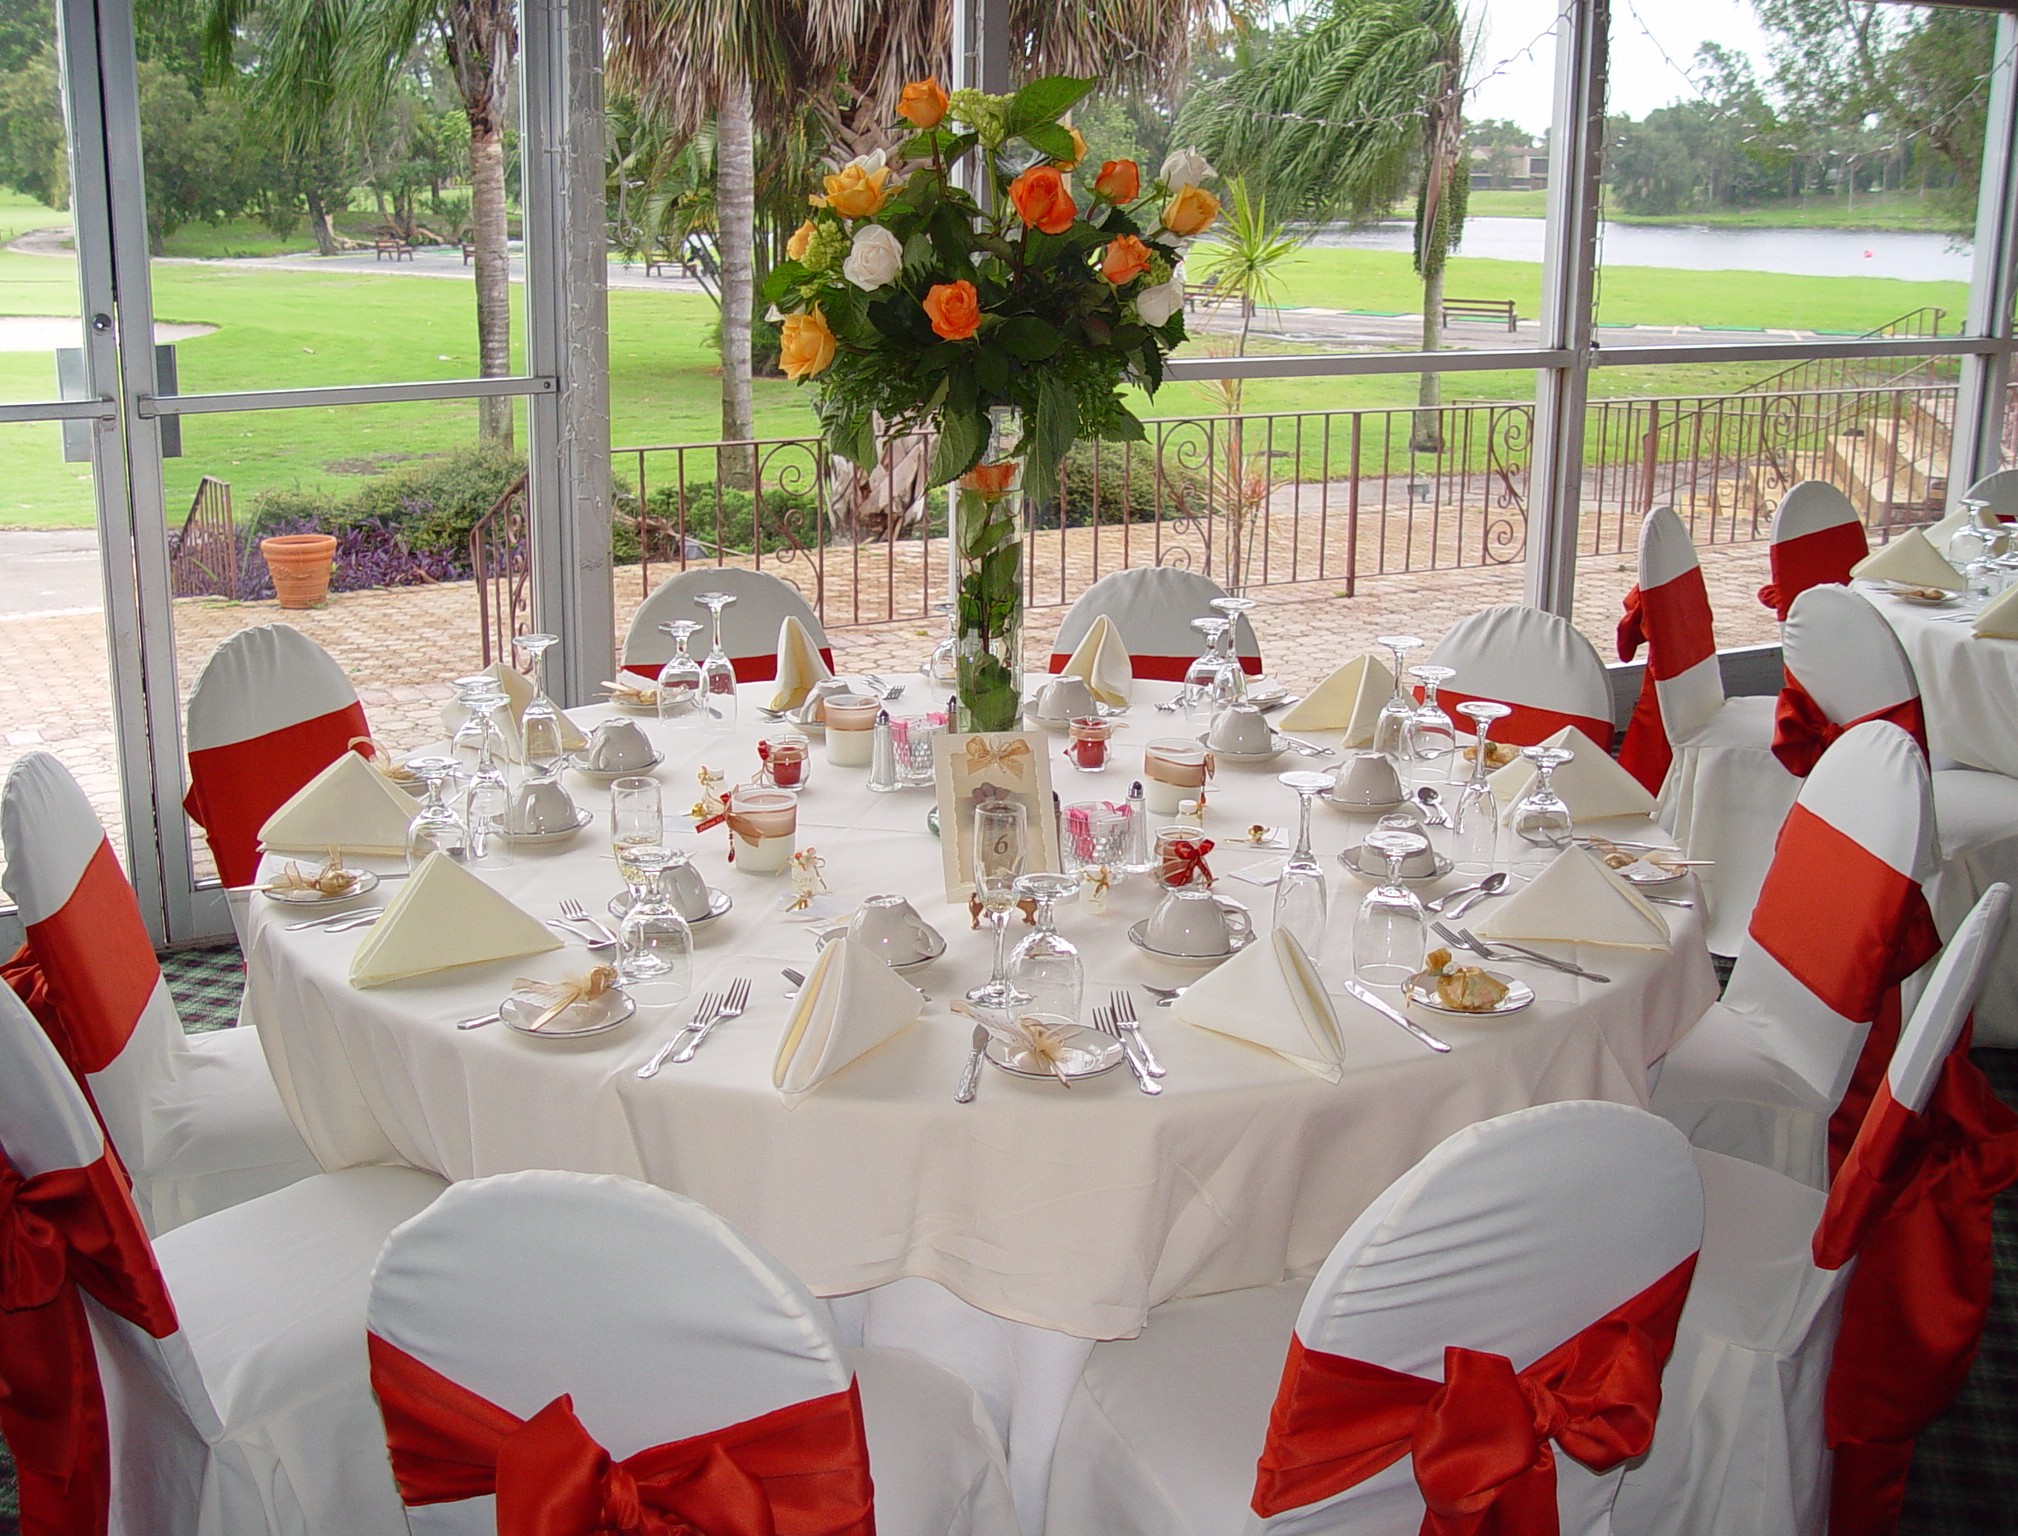 Decorations For Wedding Tables Wedding Table Decorations Plus Cover White Chairs With Red Bows And White Tablecloth Then Neatly Stacked Tableware Also Is Added In The Middle Of The Centerpieces Flowe decorations for wedding tables|guidedecor.com